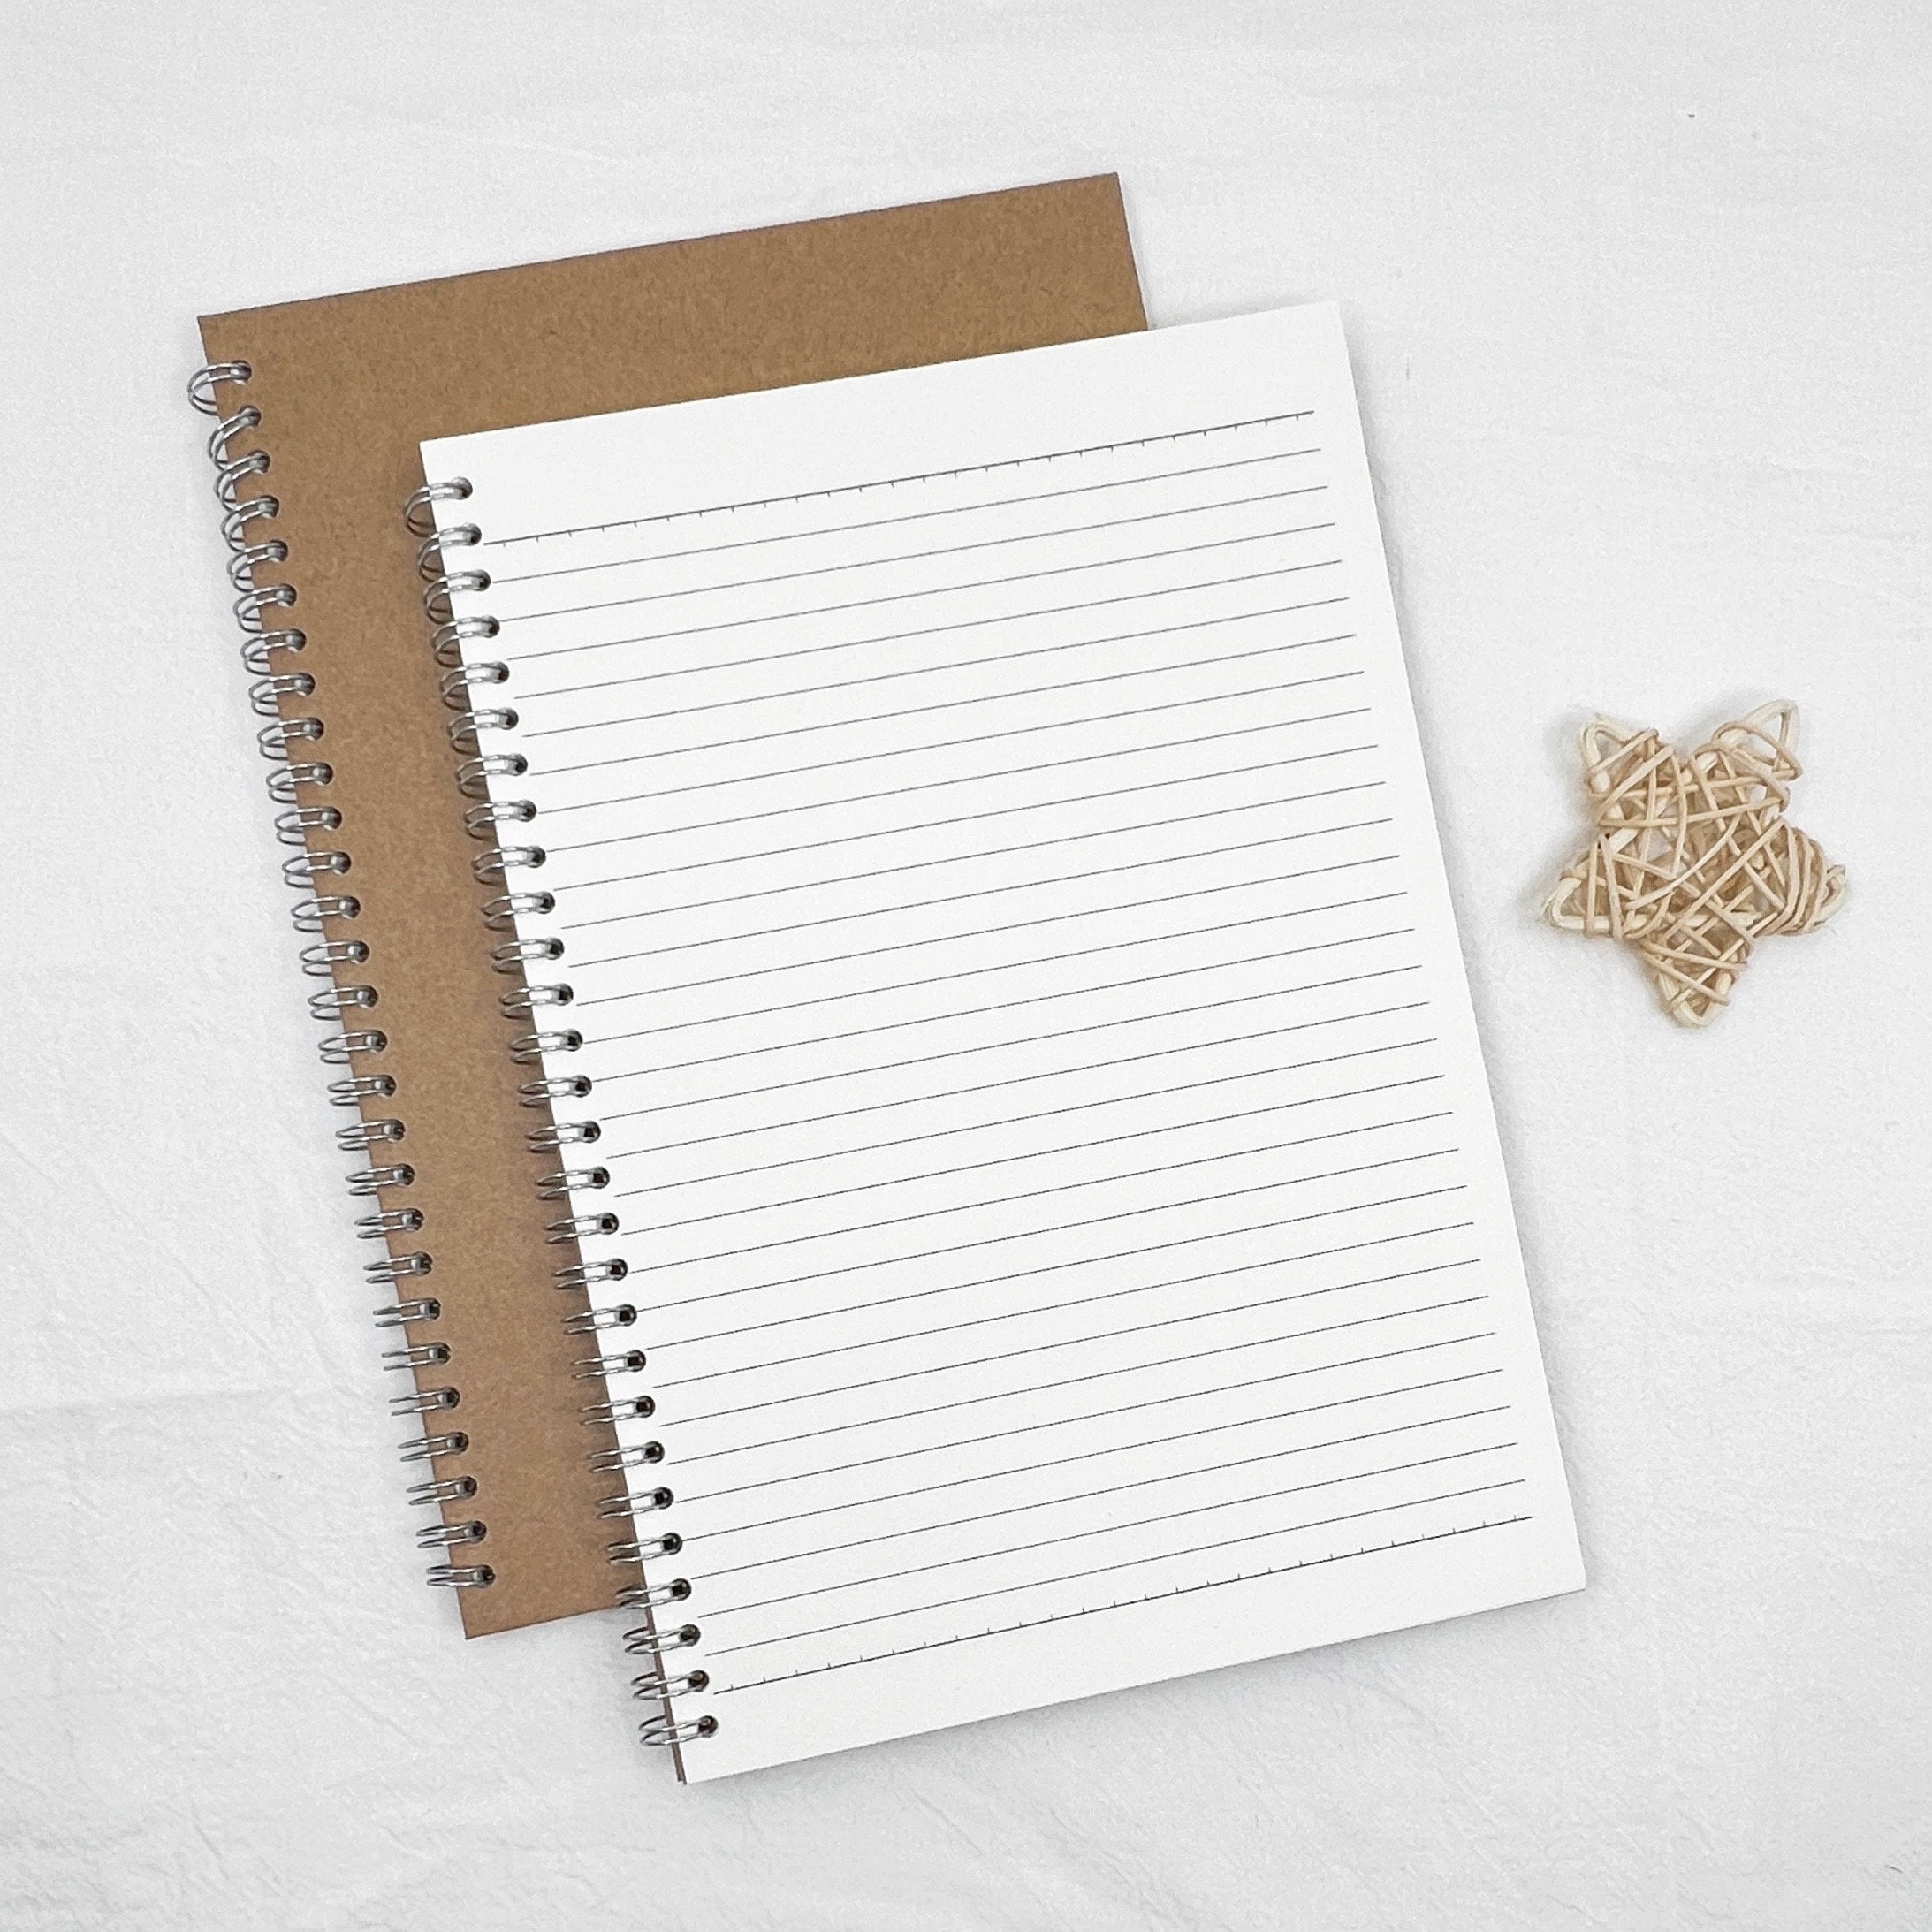 (2-Pack) B5 Dot Grid Notebook 100gsm Bullet Spiral Journal 7.1 x 10 inches  - 80 Sheets Per Book, Thick Dotted Paper, Wirebound